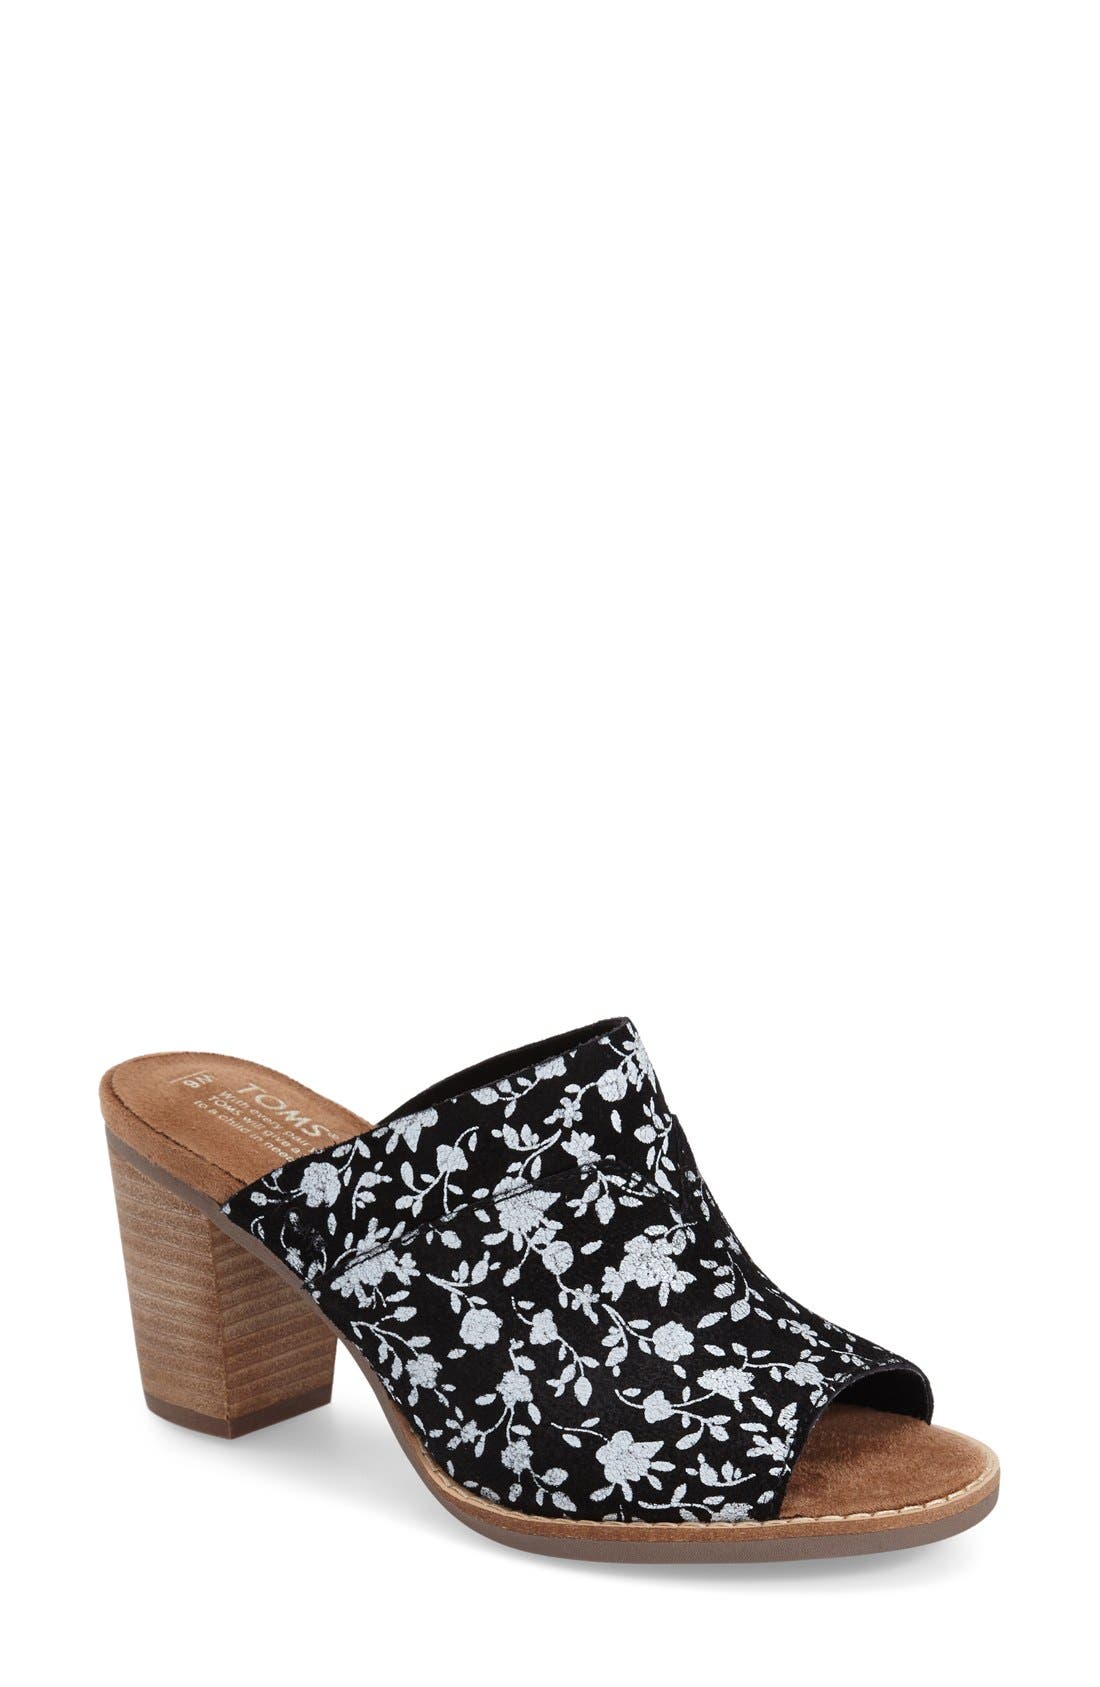 toms mules nordstrom